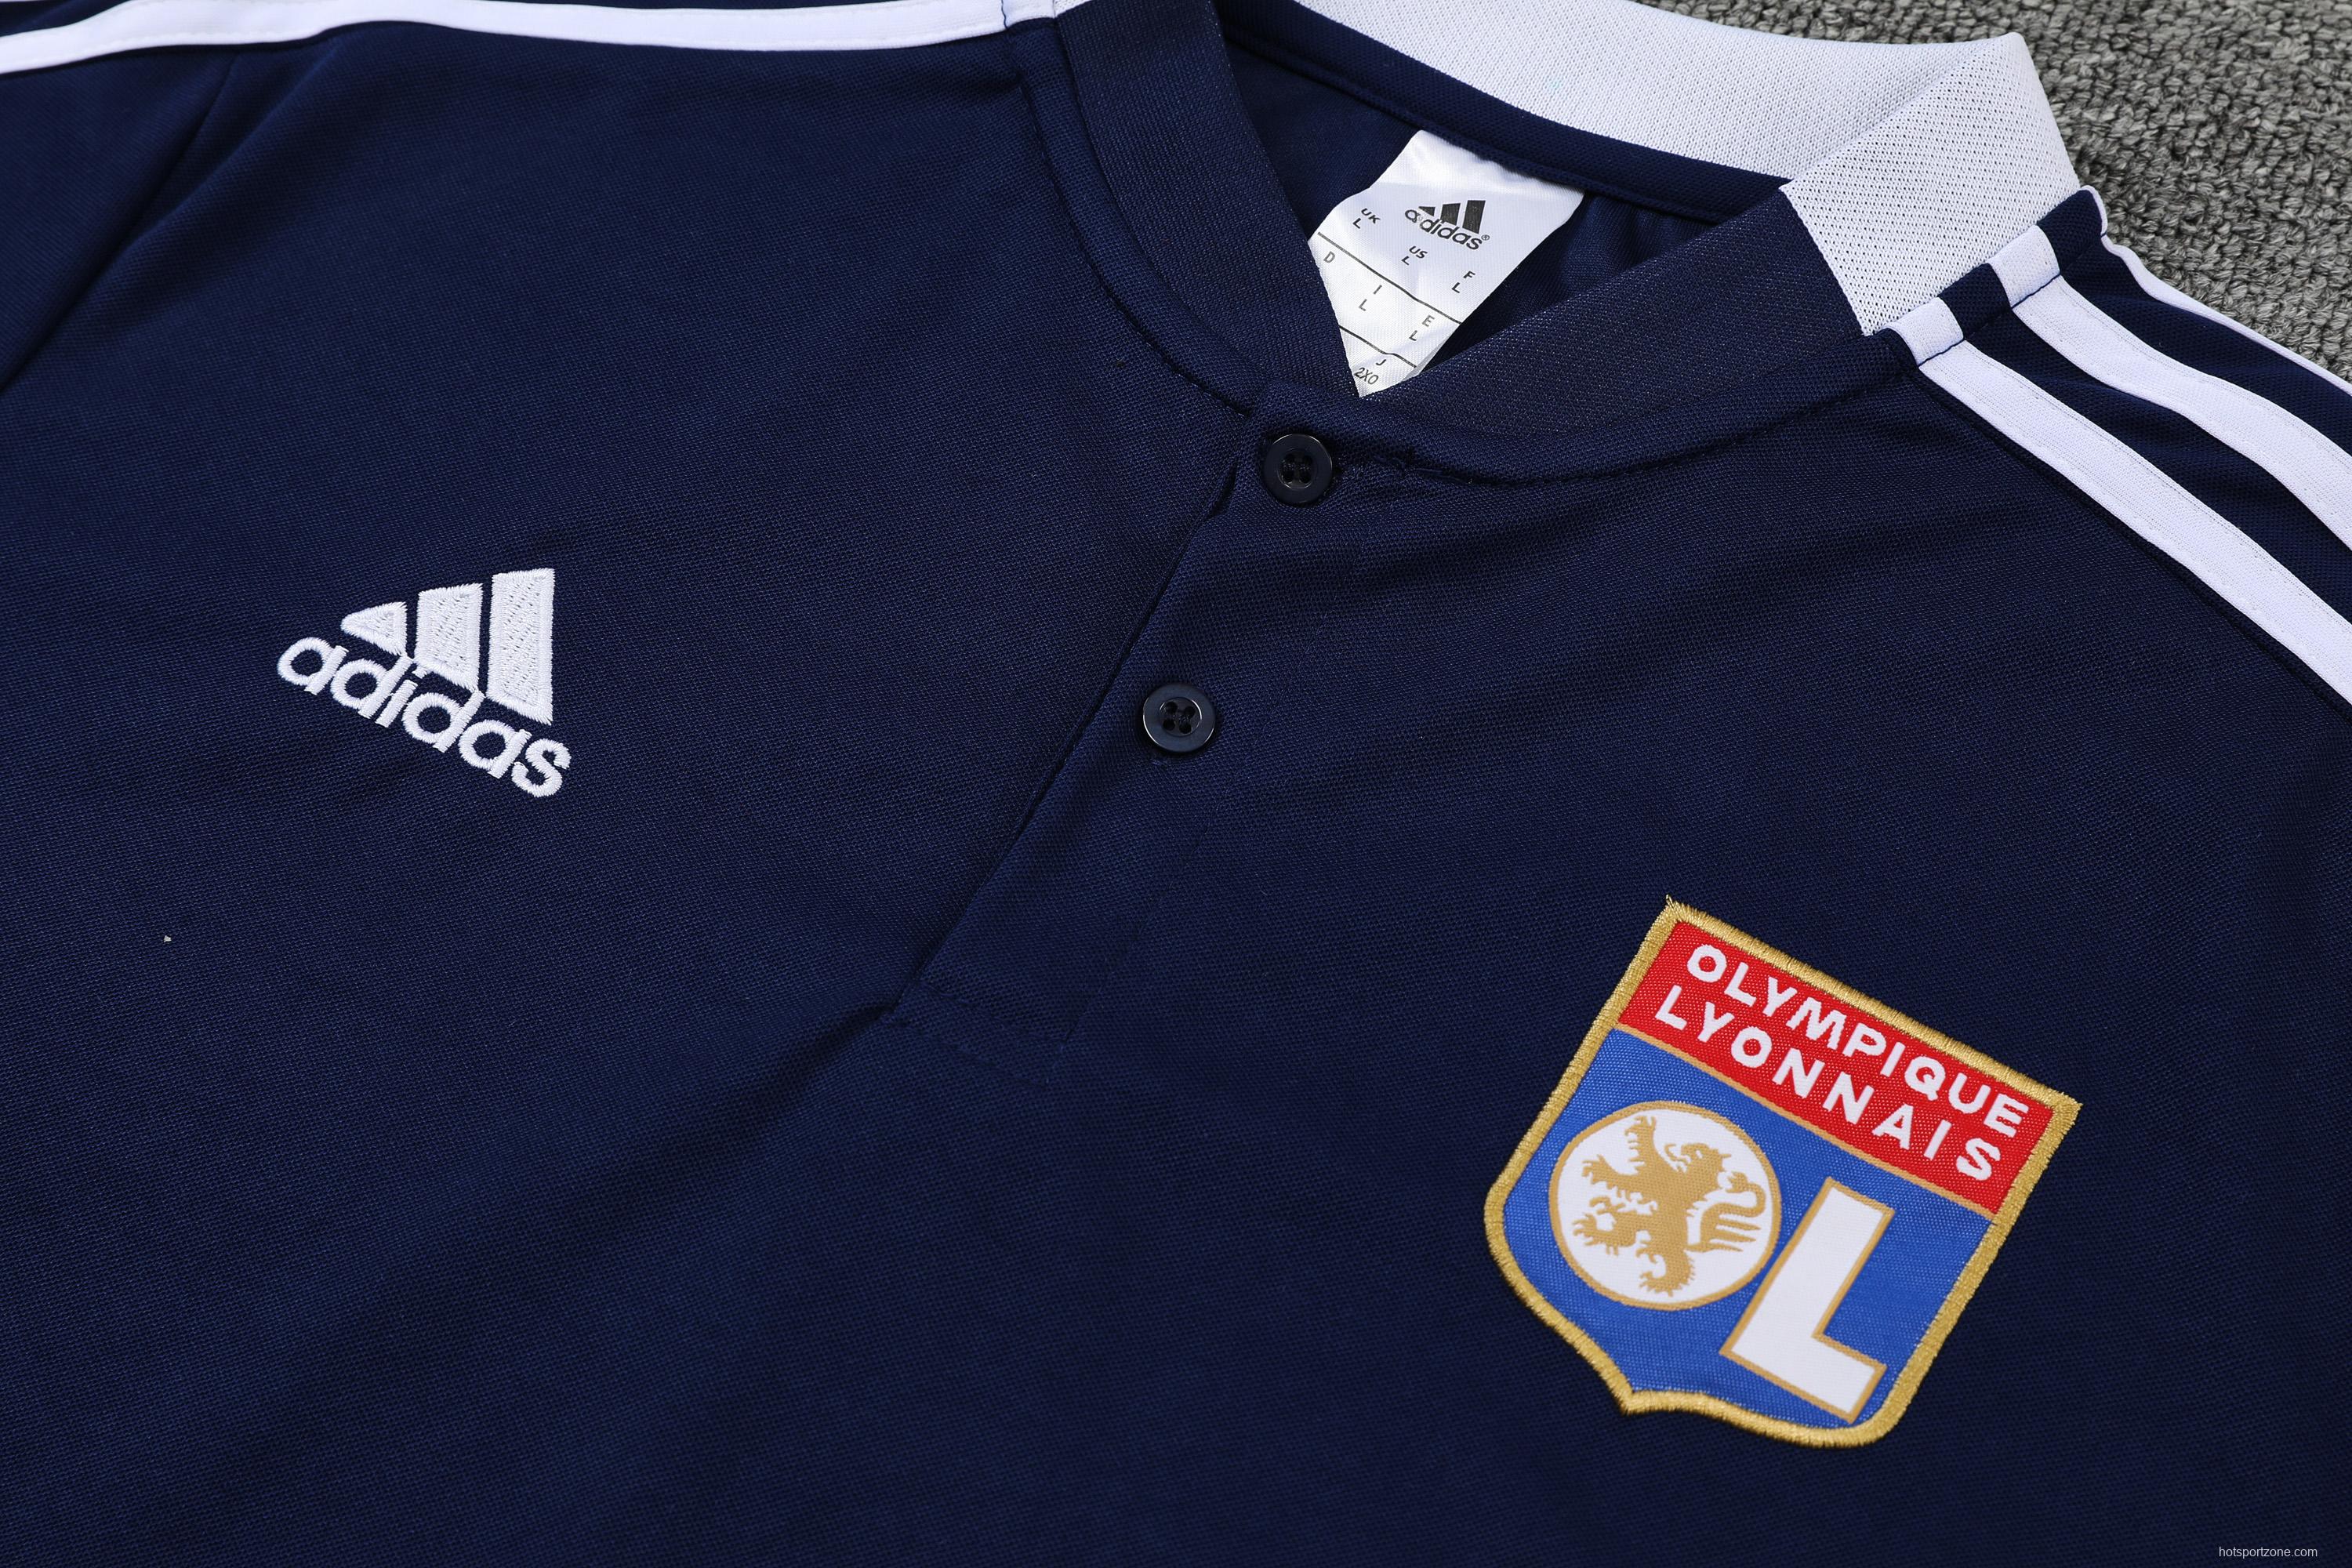 Olympique Lyonnais POLO kit dark blue (not supported to be sold separately)